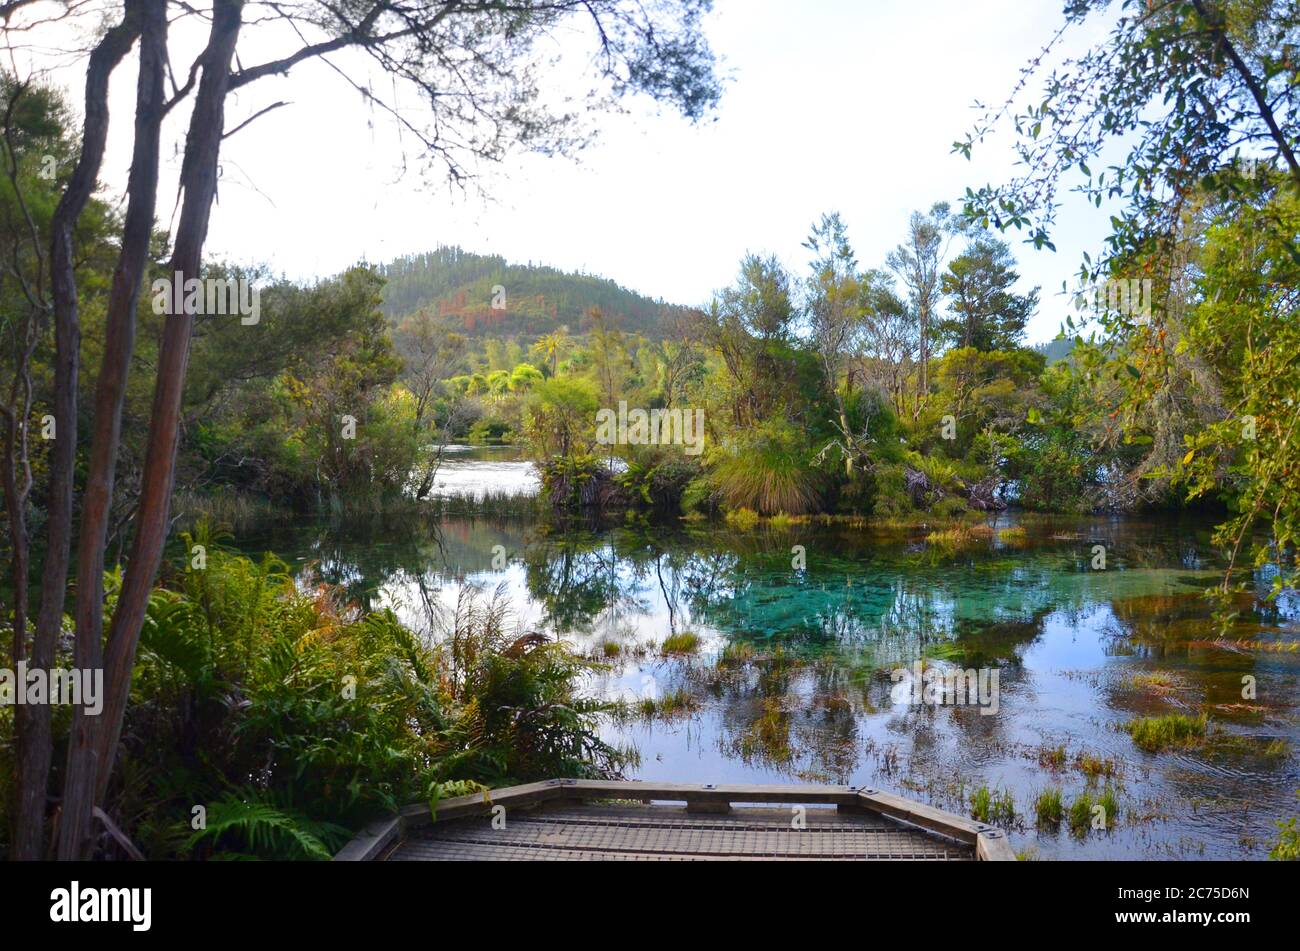 The Pupu Spring (Te Waikoropupu springs) in Golden Bay are home to the clearest springwater in the world. Stock Photo